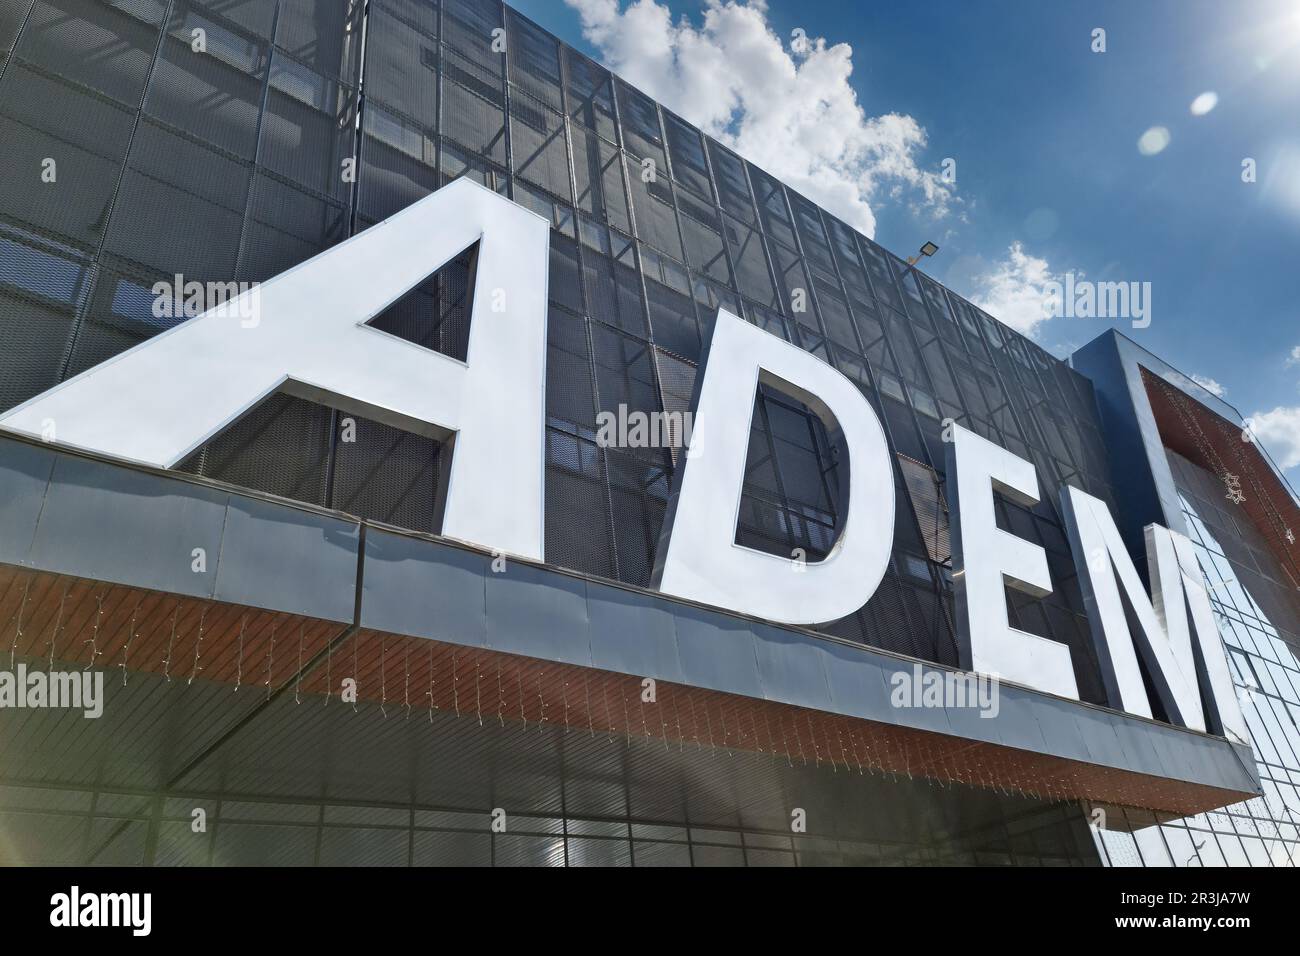 The facade of the covered market with the name Adem in the area of the famous flea market of Almaty Stock Photo